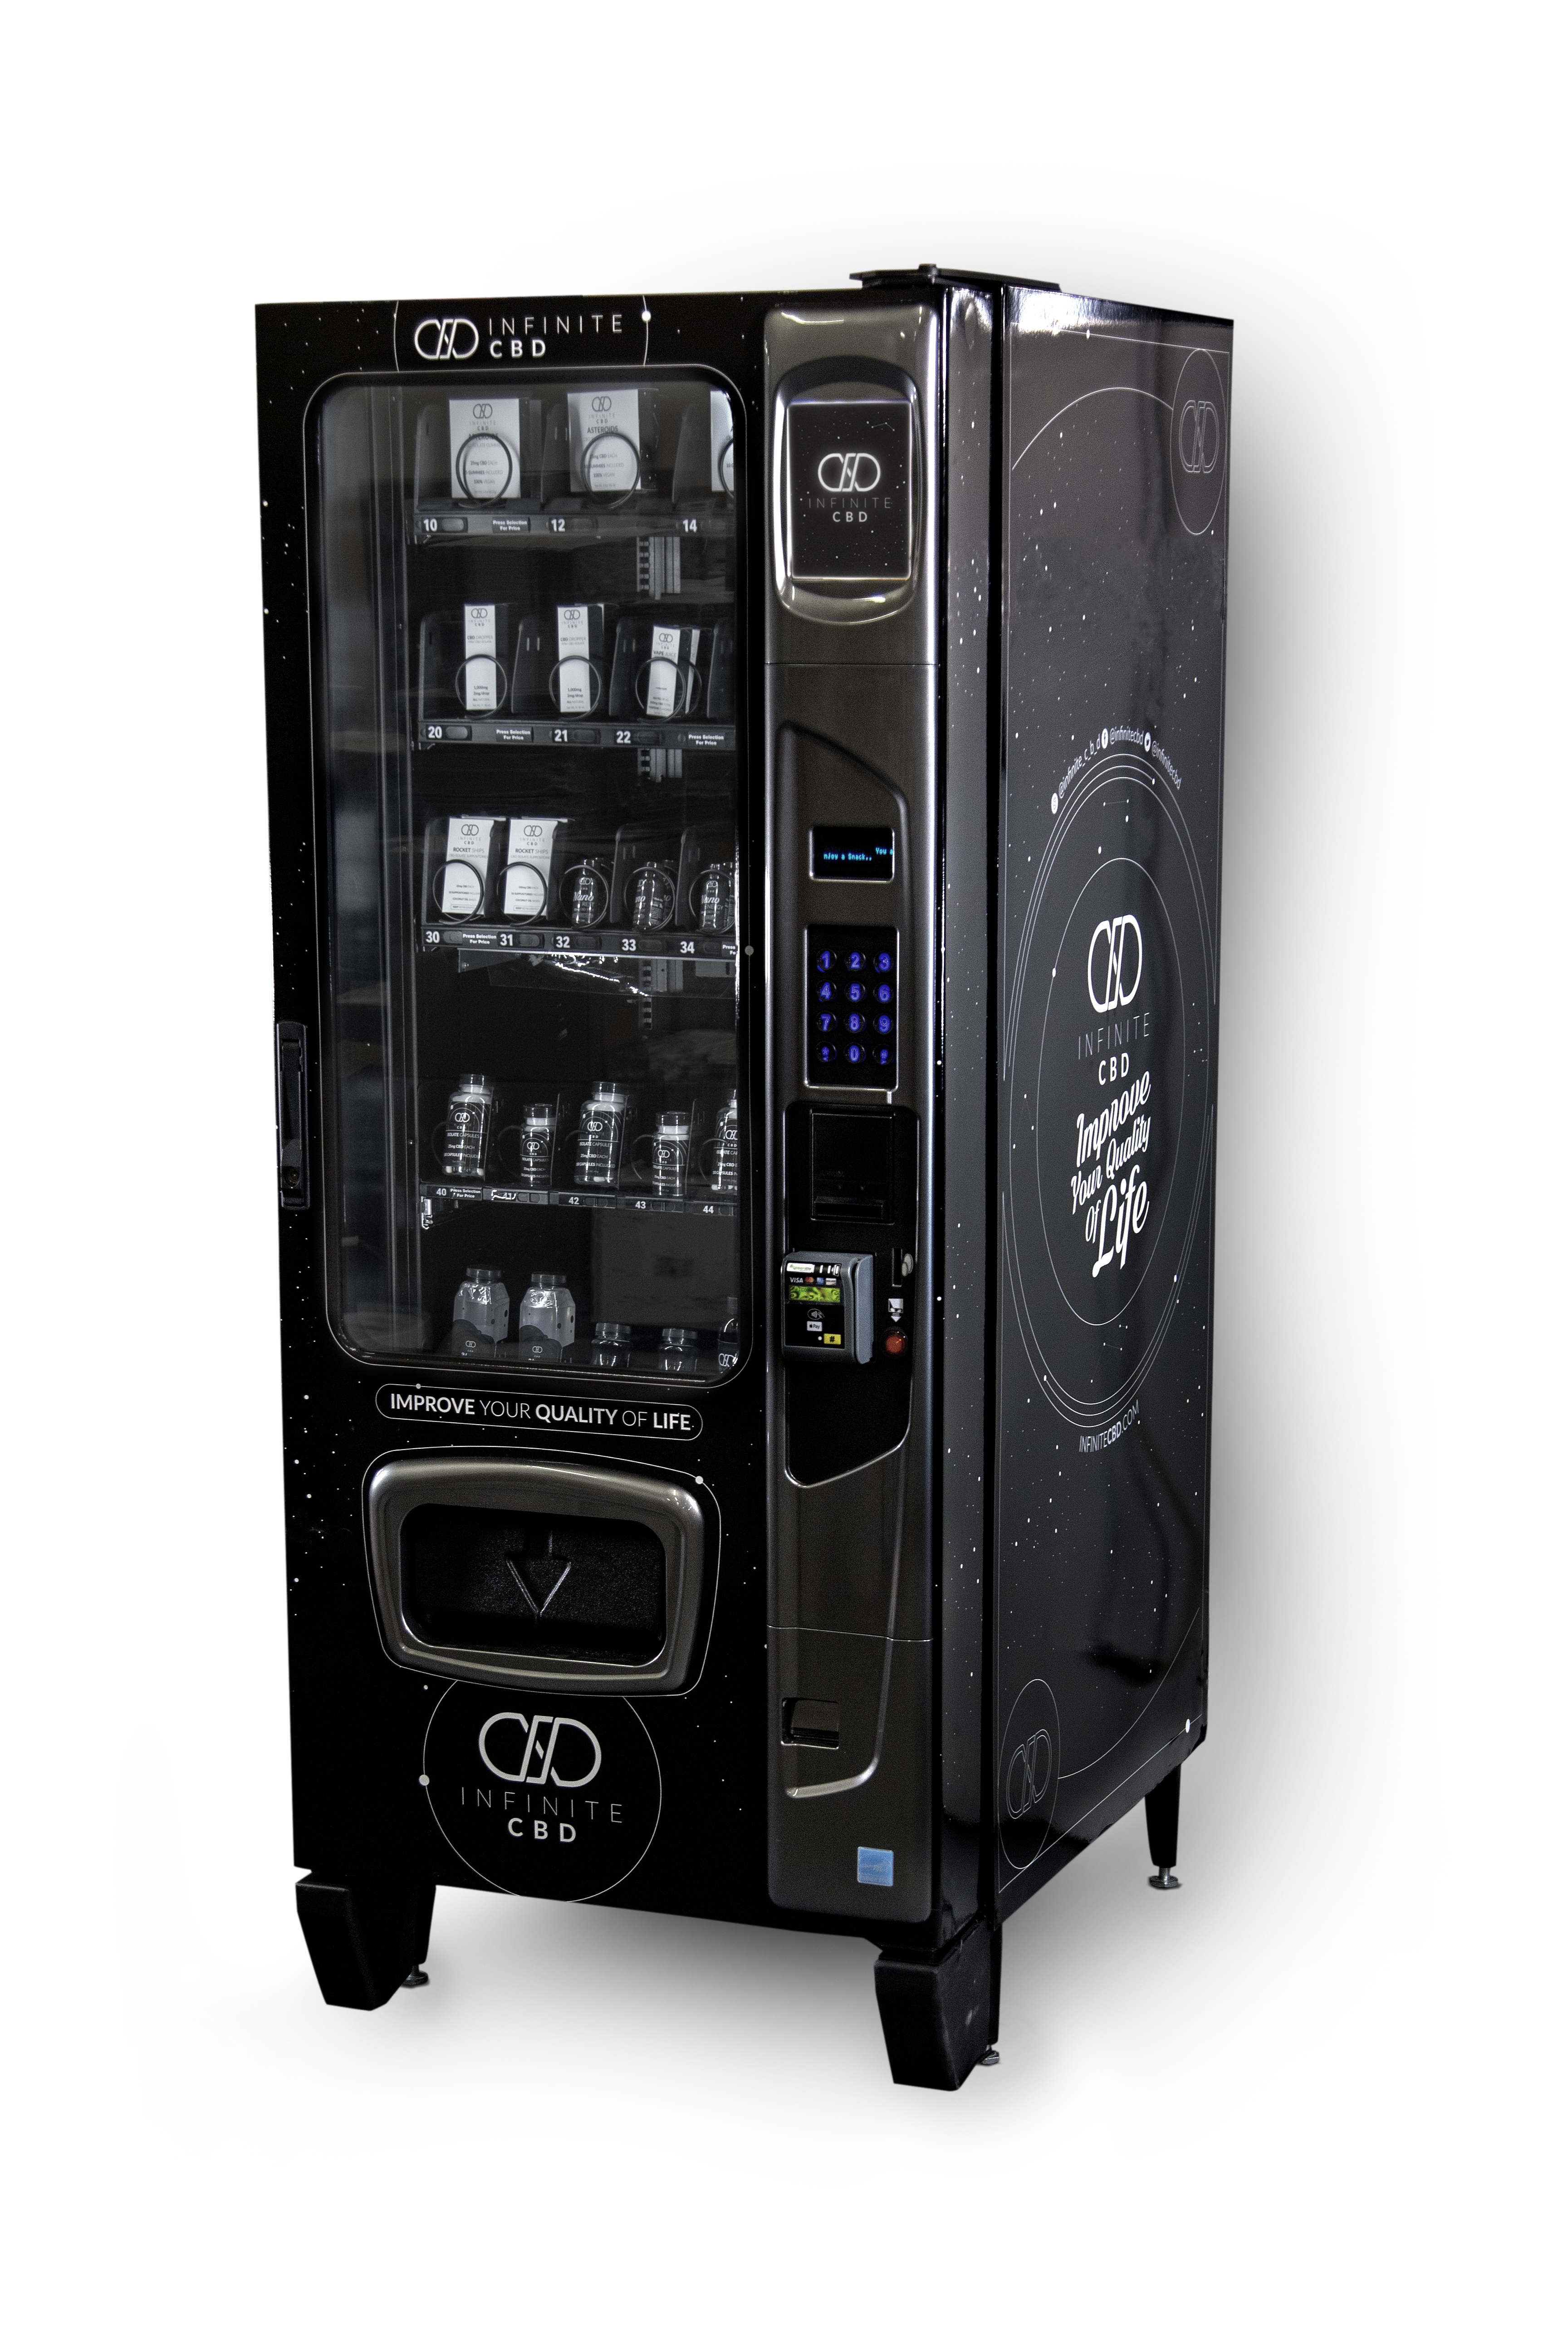 Infinite CBD offers customers easier access to CBD products with vending machines for all locations.